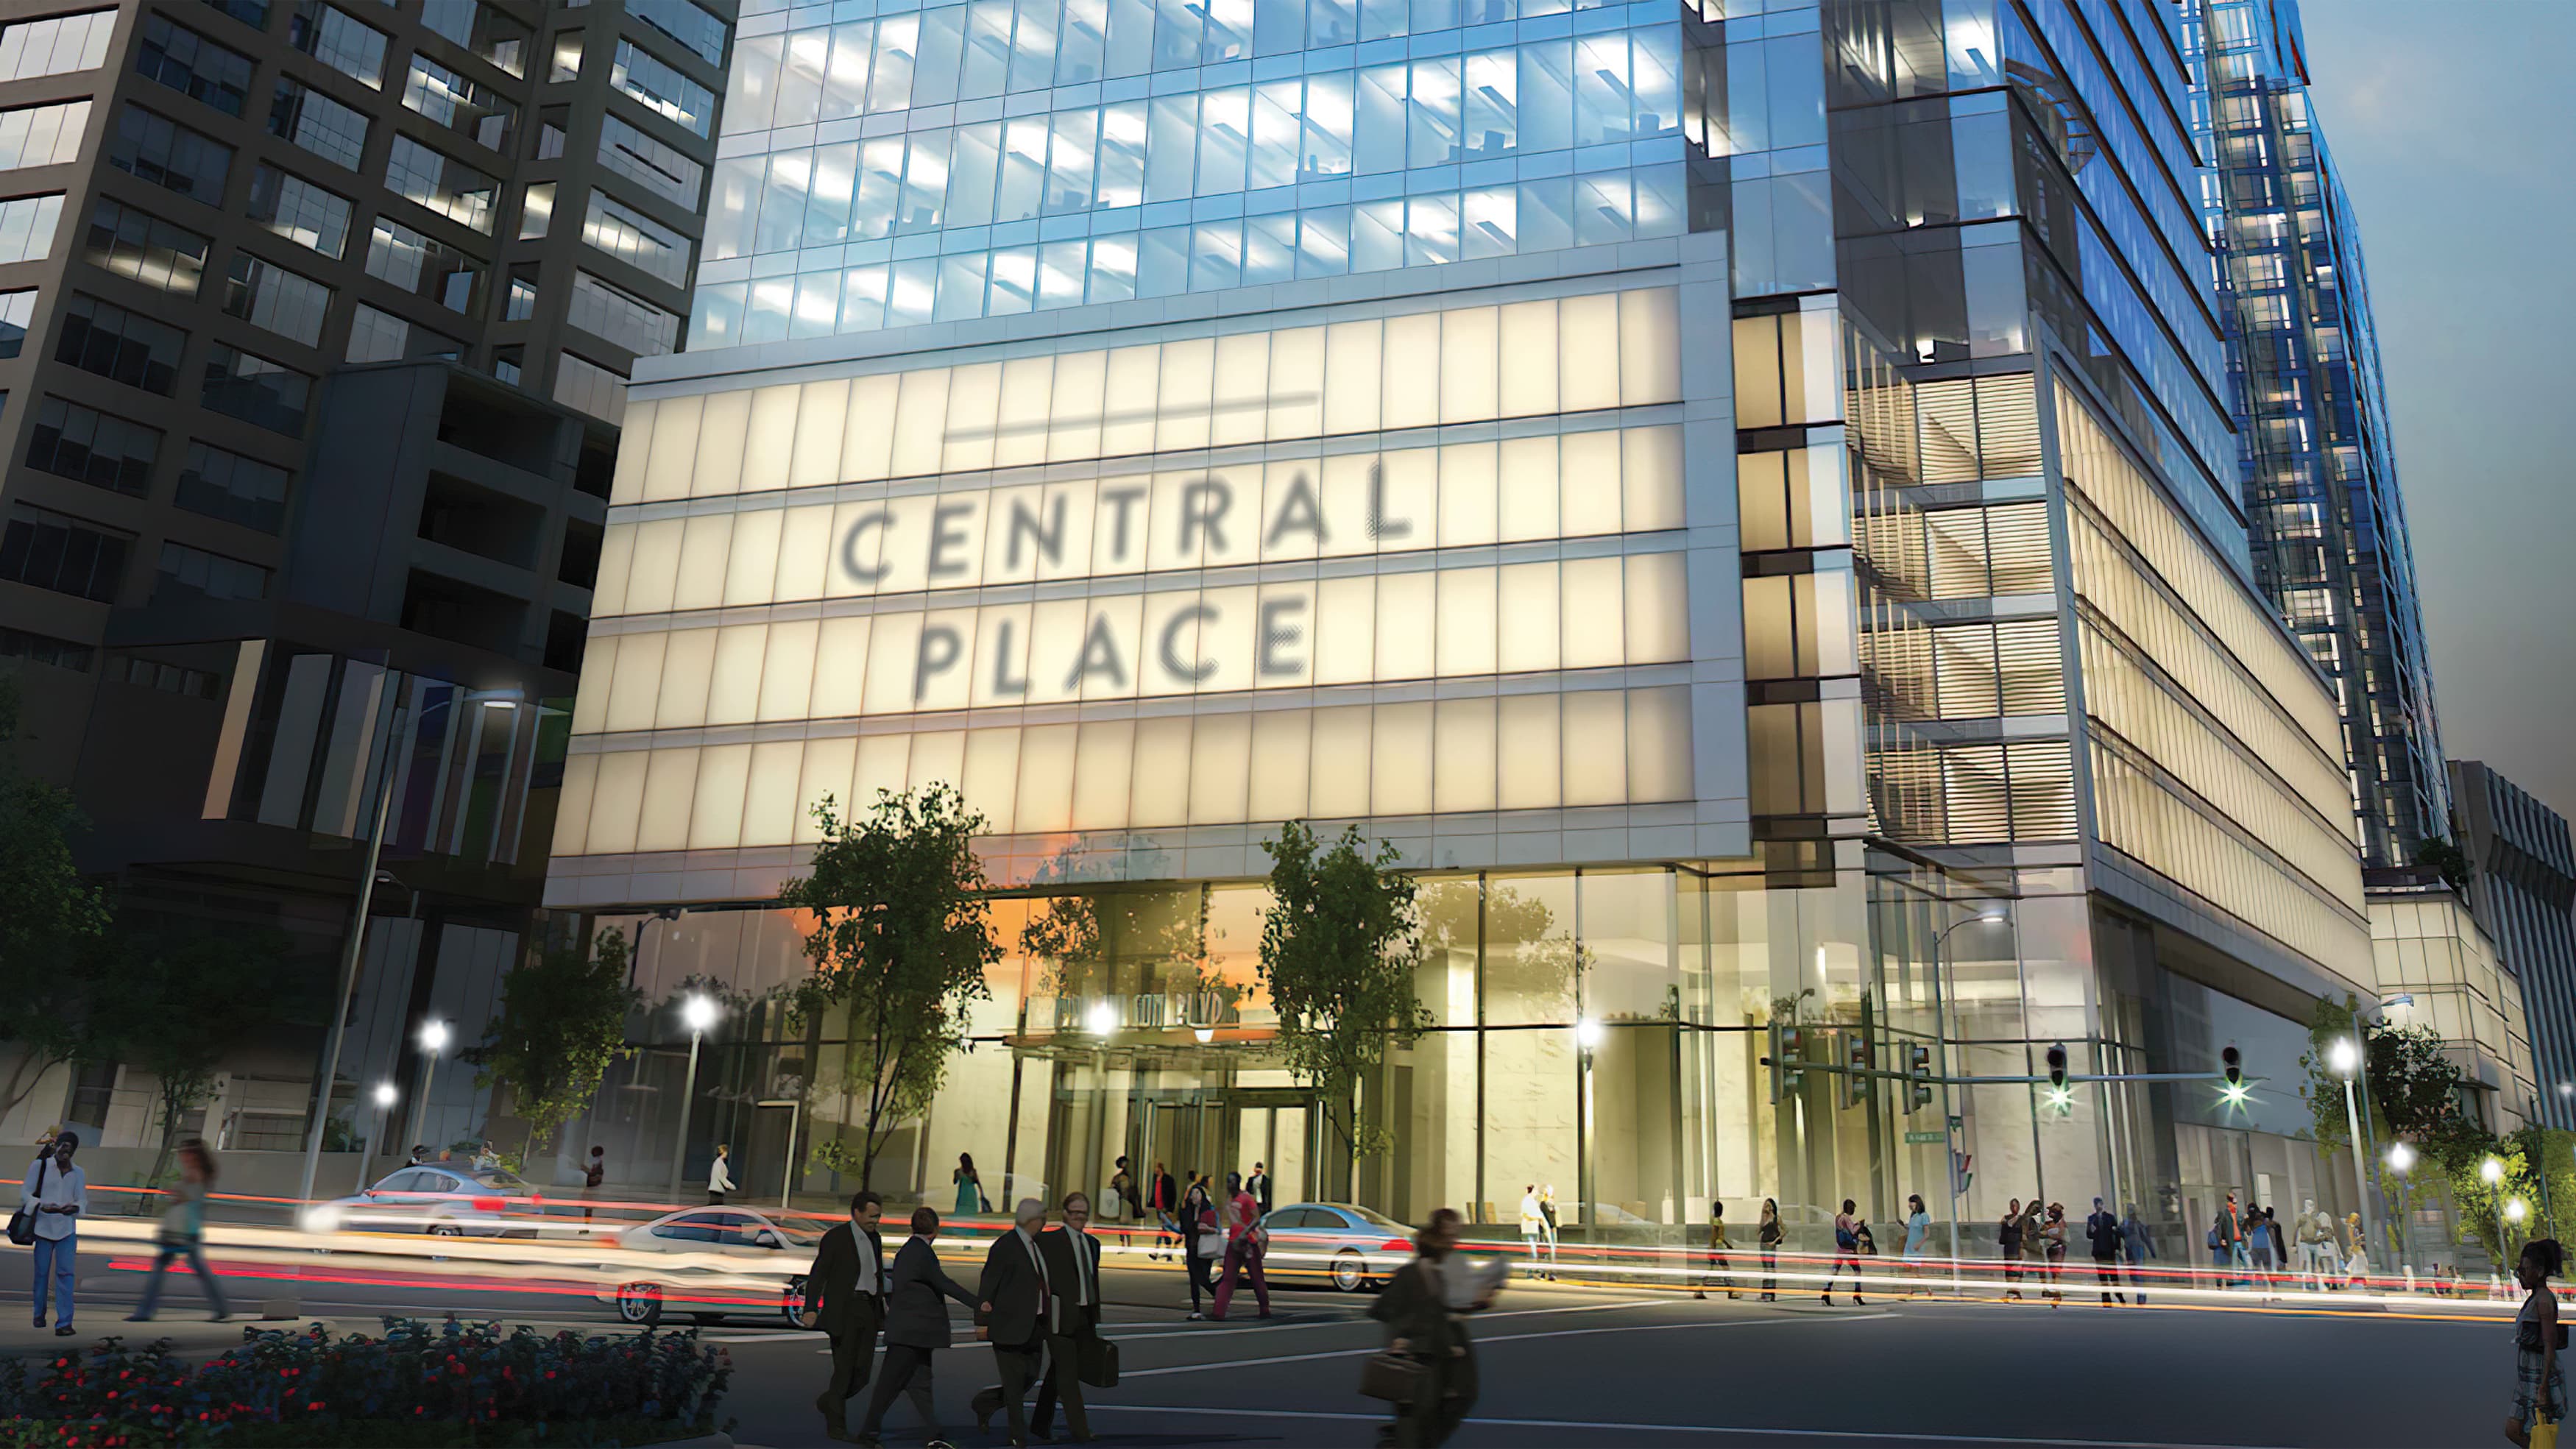 An image of a large glass building in an urban setting with prominent signage reading Central Place.